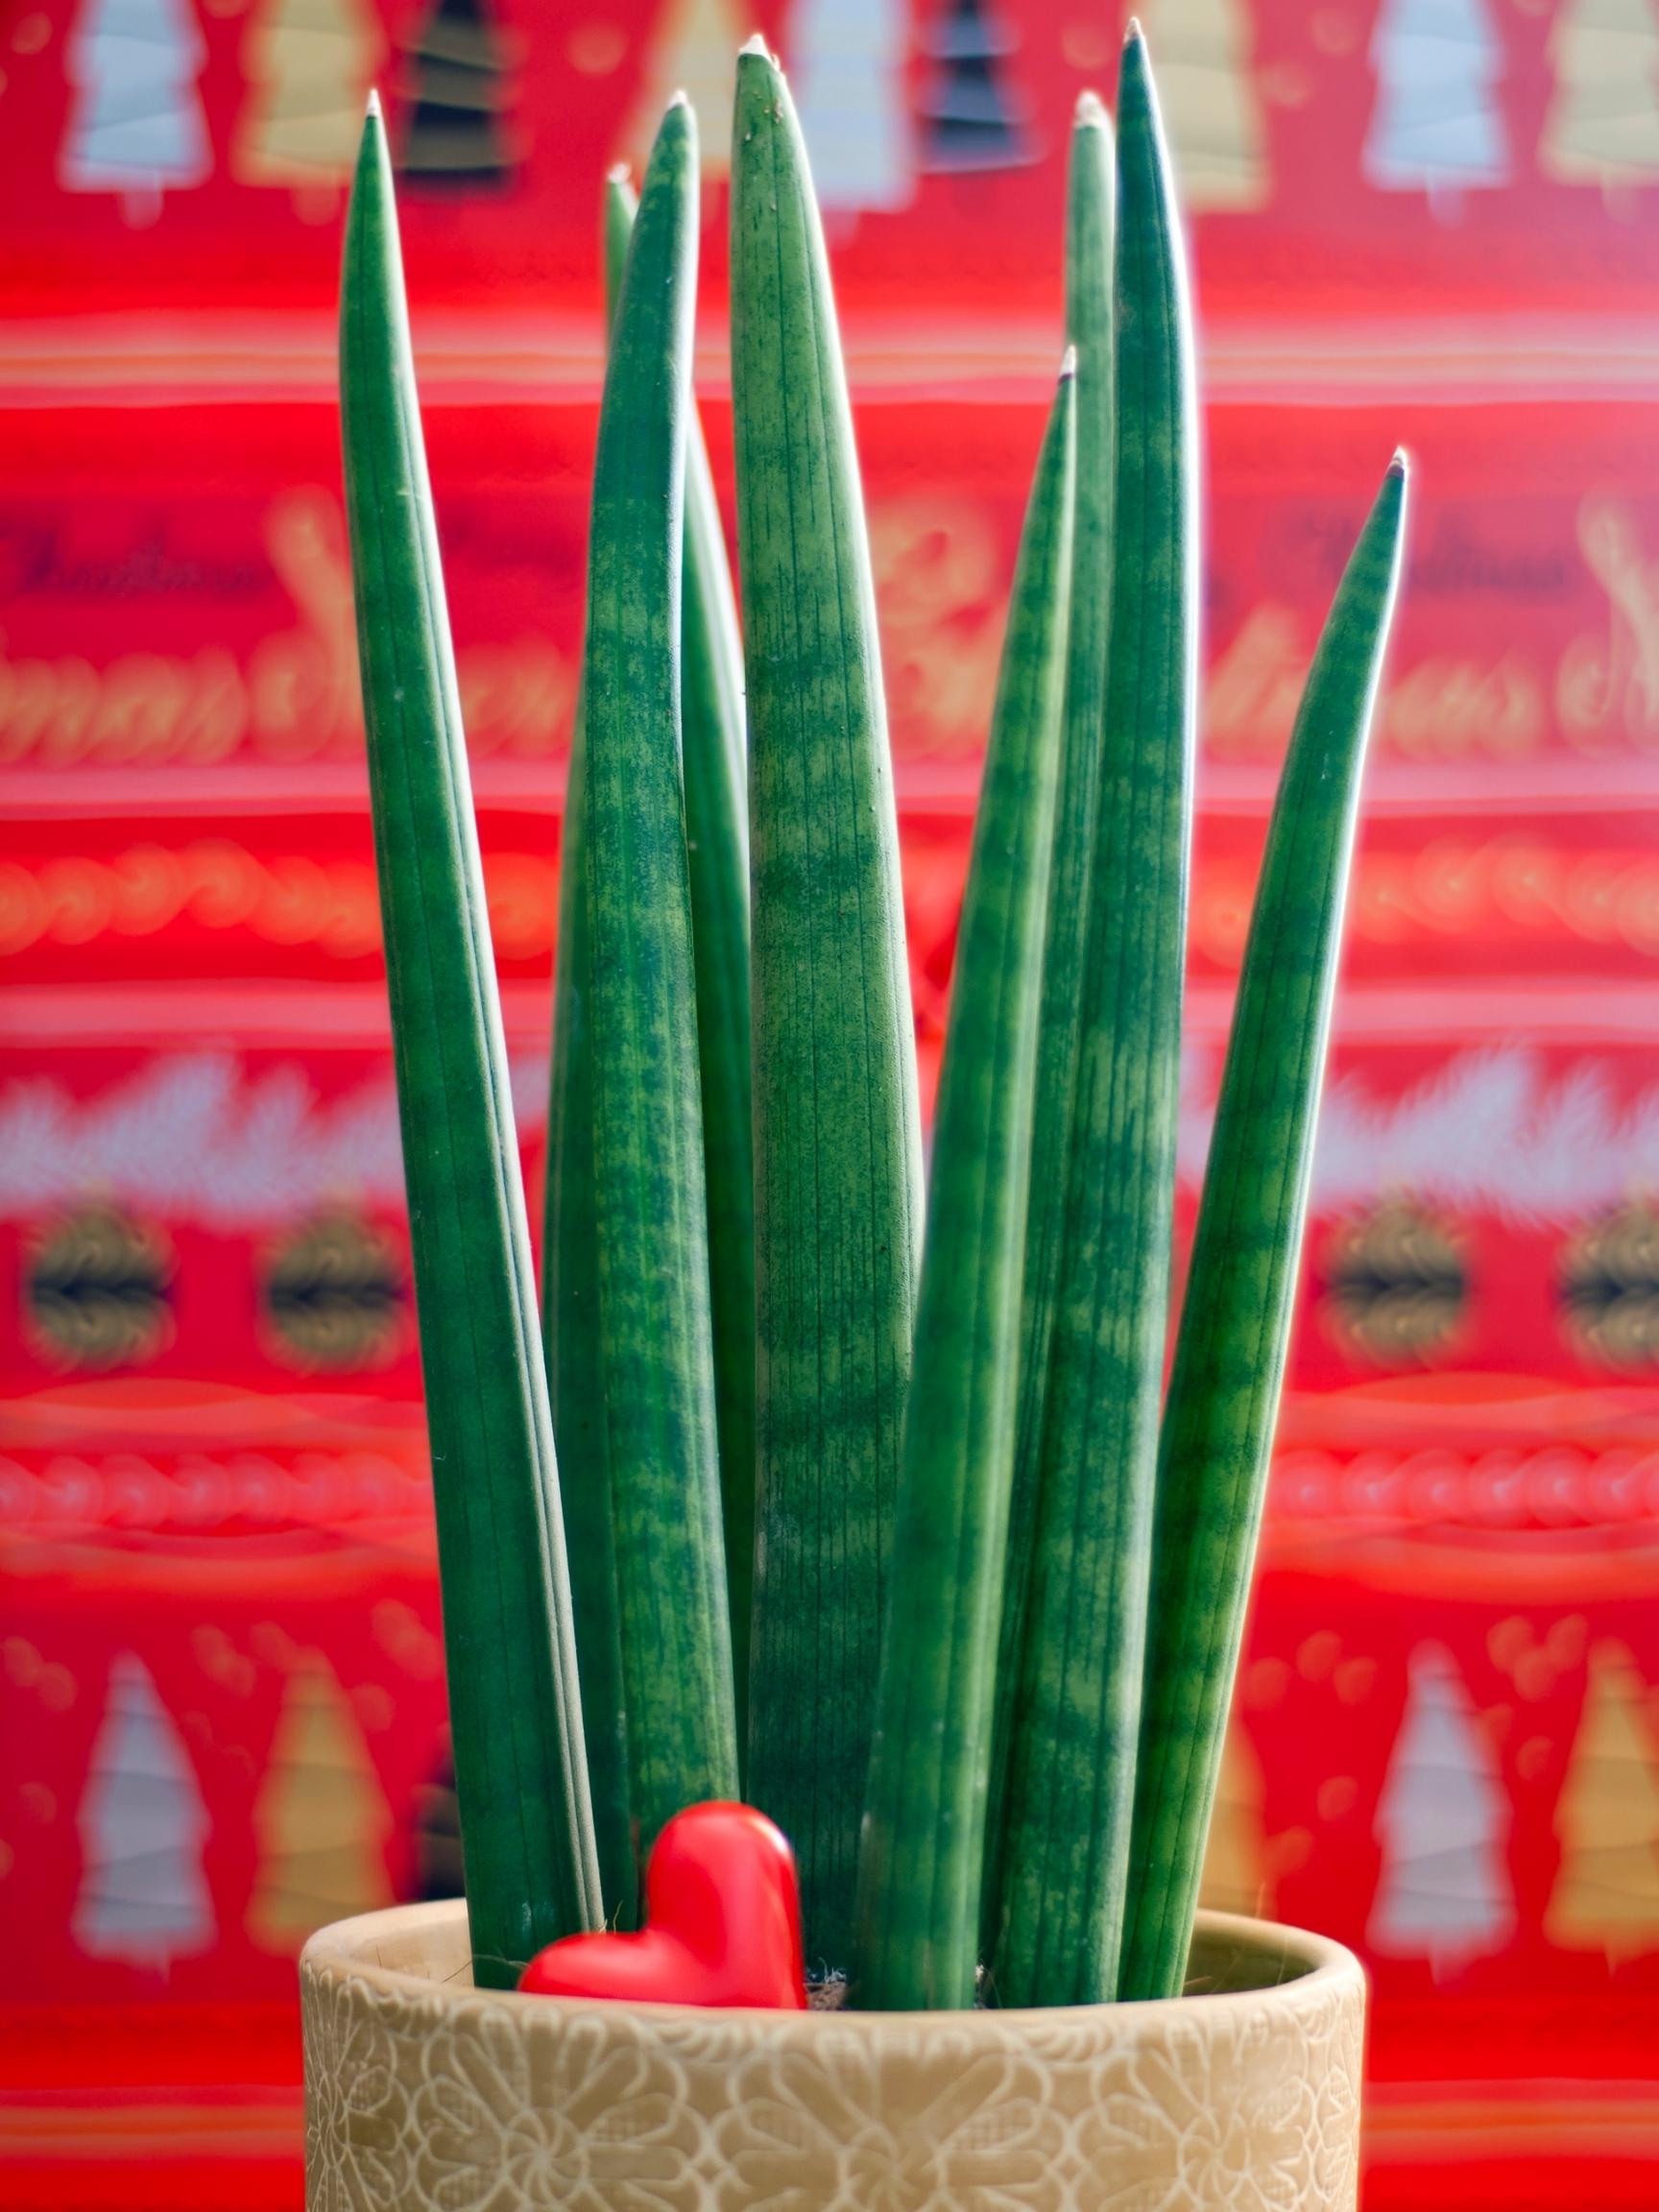 sansevieria cylindrica plant care guide and profile - the